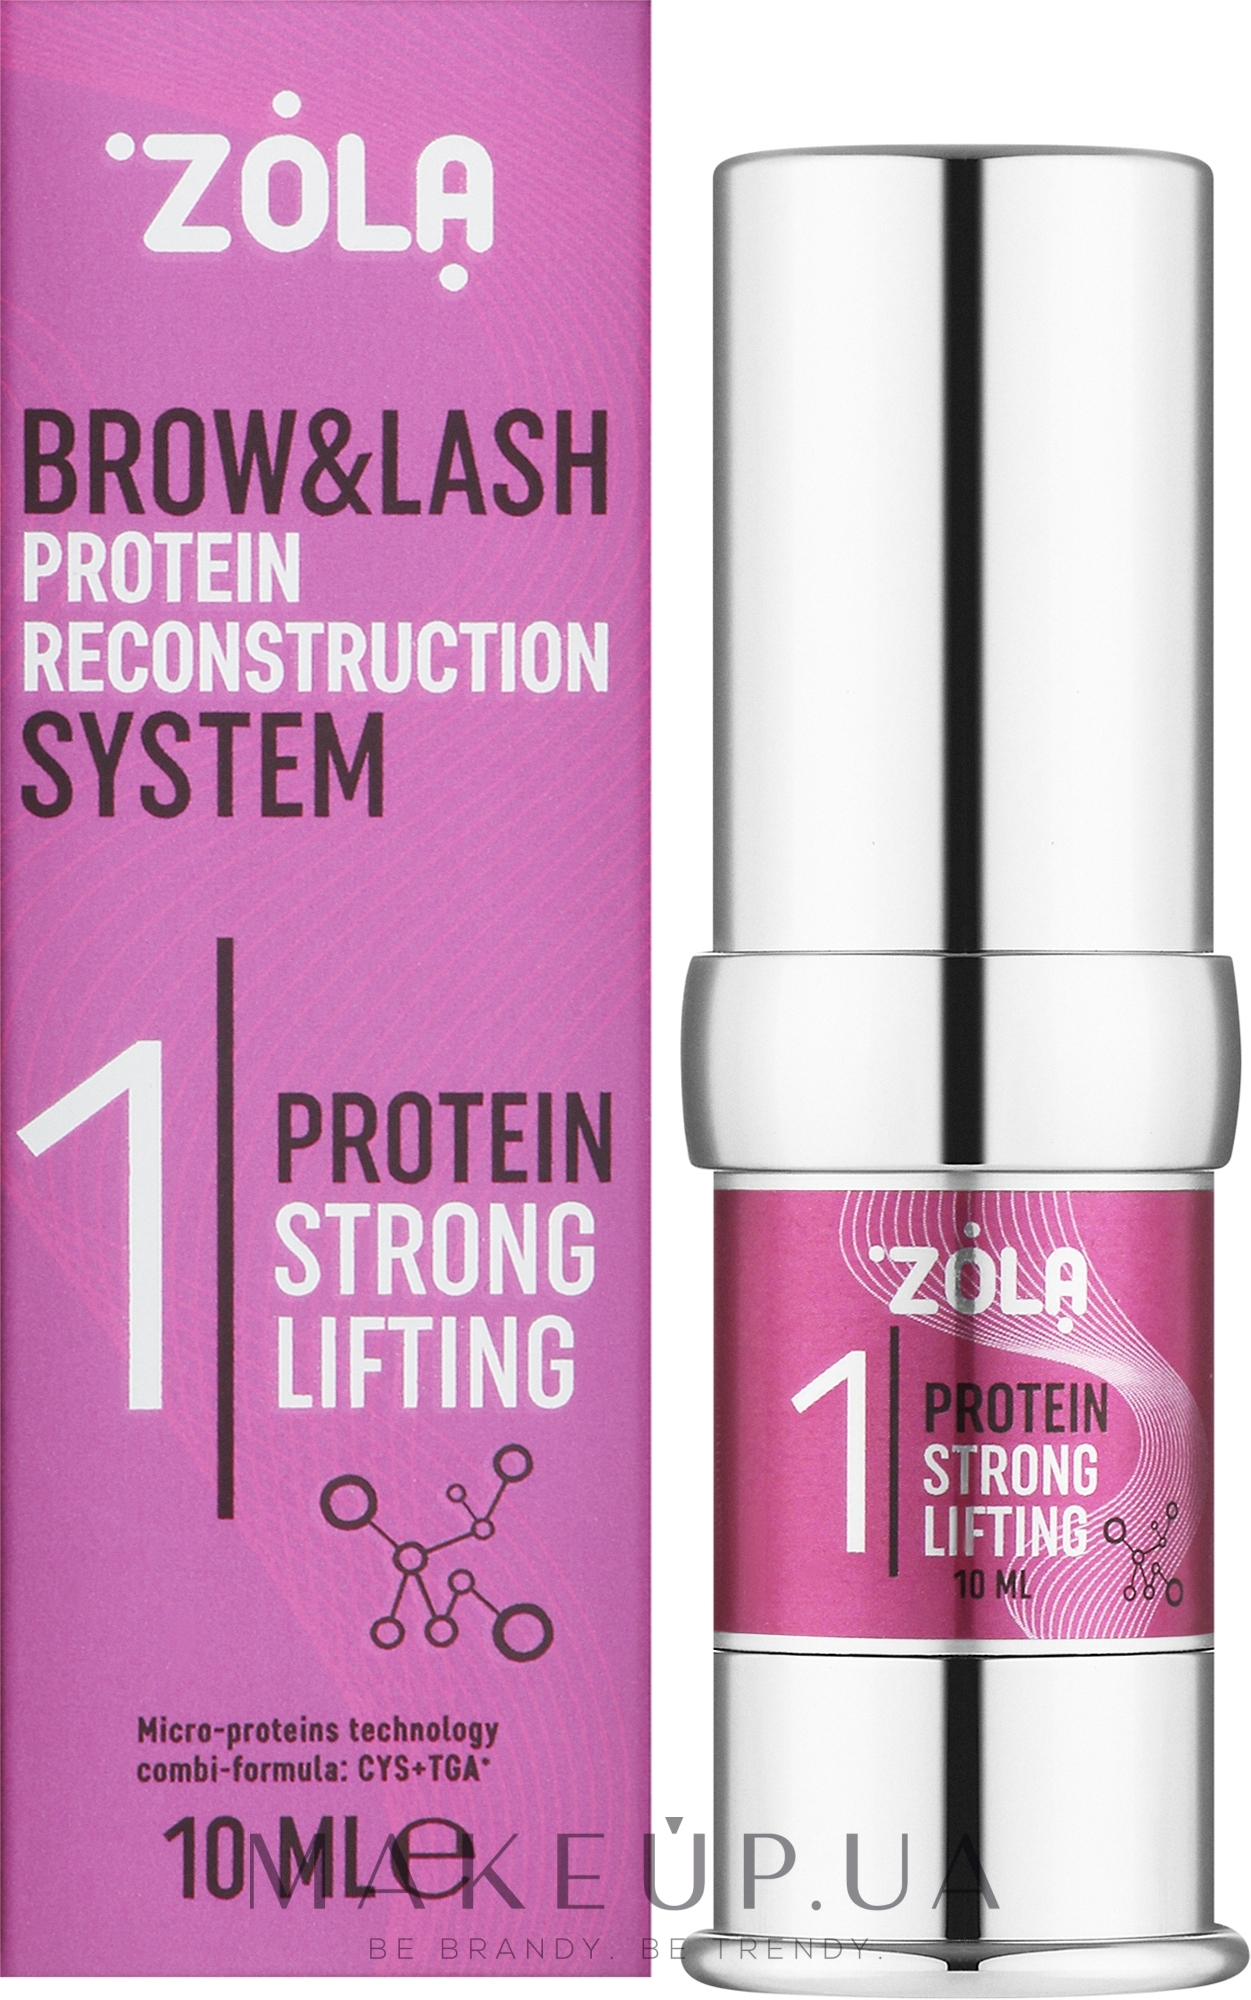 Zola Brow And Lash Protein Reconstruction System 01 Protein Strong Lifting - Zola Brow And Lash Protein Reconstruction System 01 Protein Strong Lifting — фото 10ml